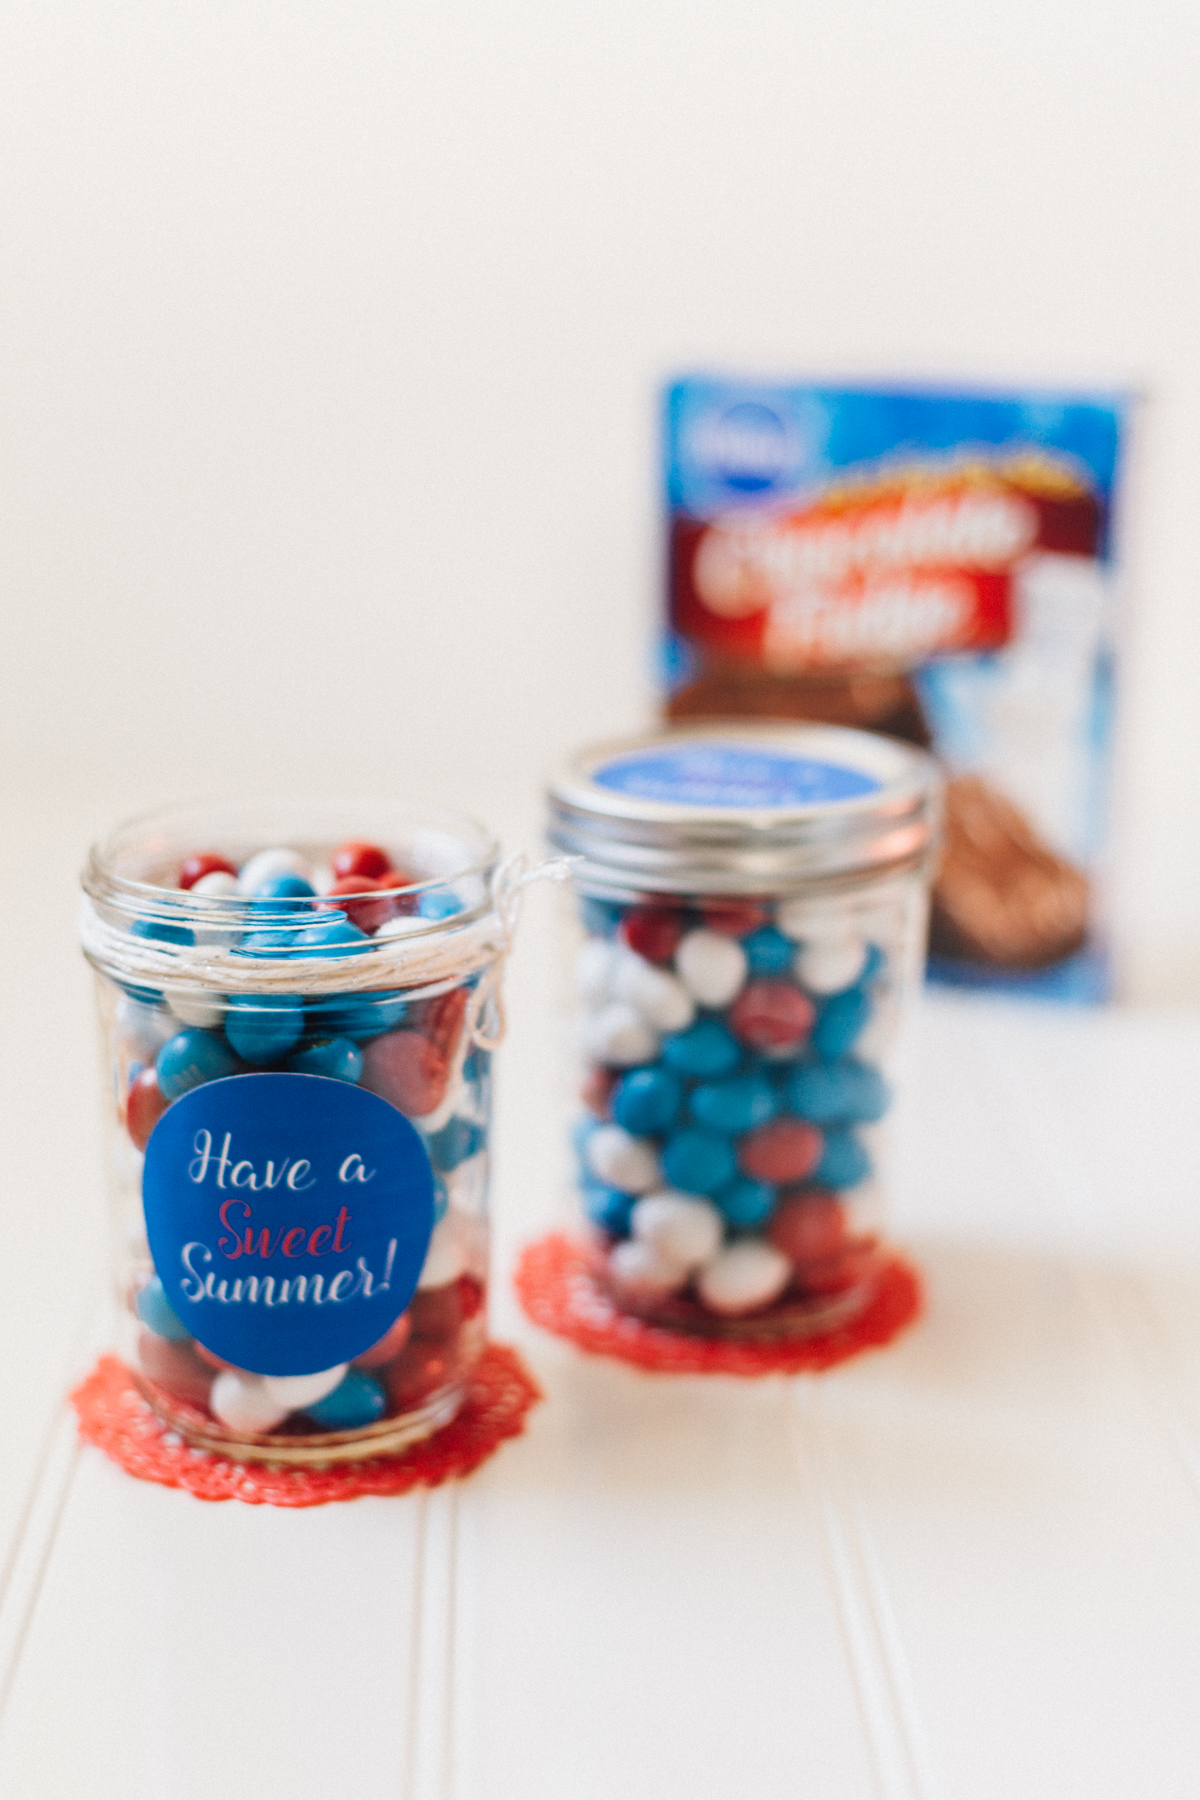 Ready to send sweet summer wishes to your loved ones? This FREE printable turns a mason jar an excellent gift! | Alyssa & Carla